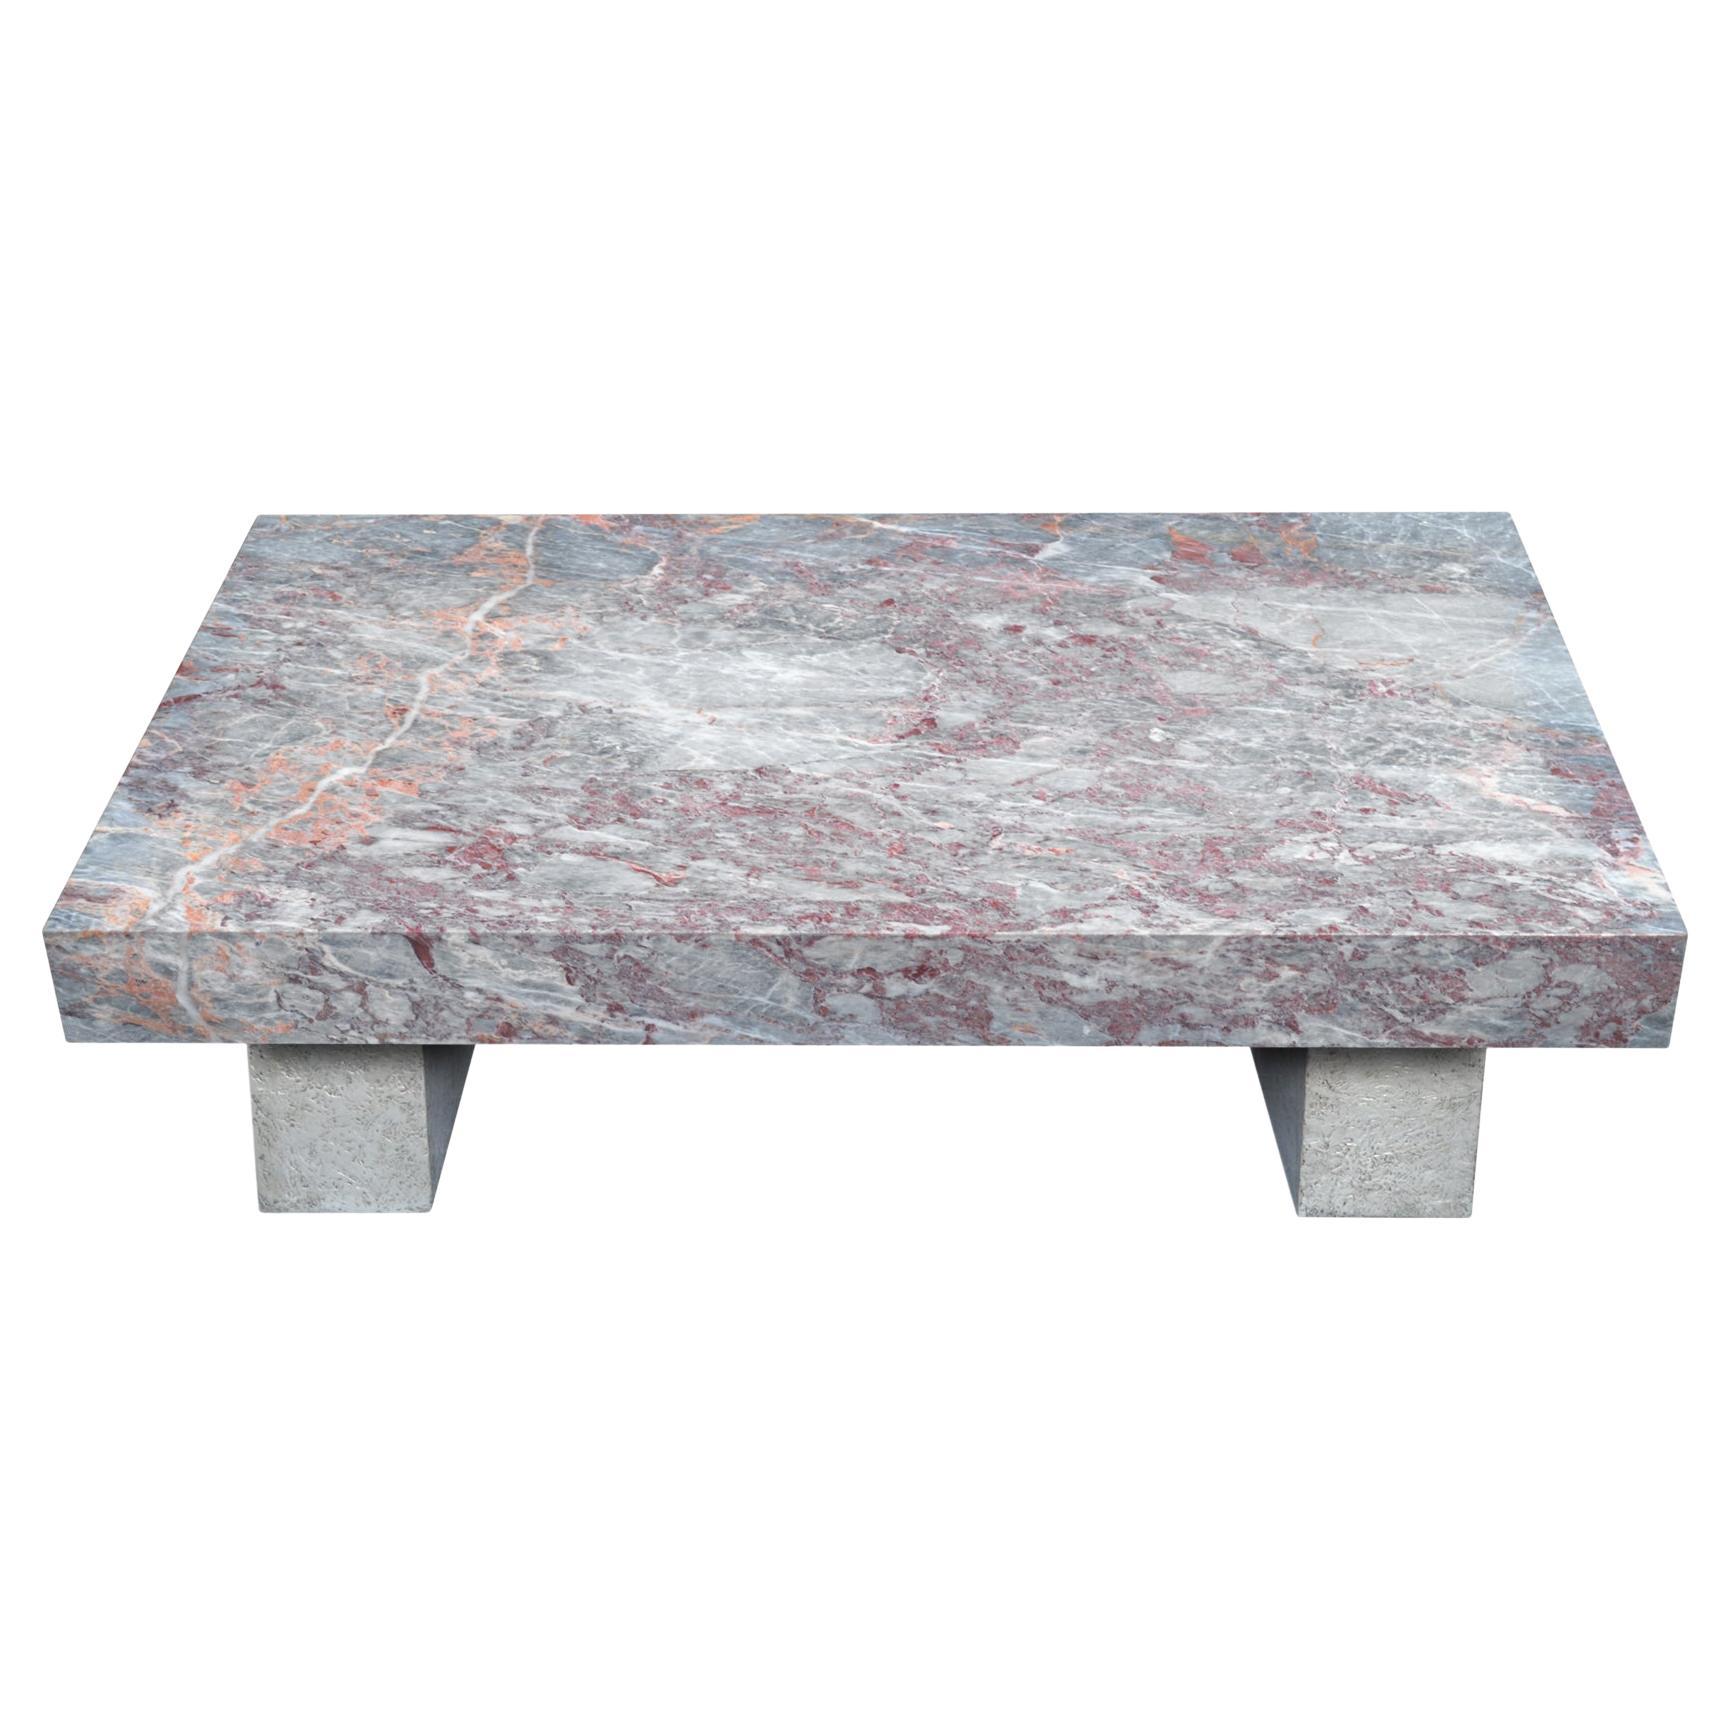 Coffee table marble top texturised legs handmade in Italy by Cupioli available